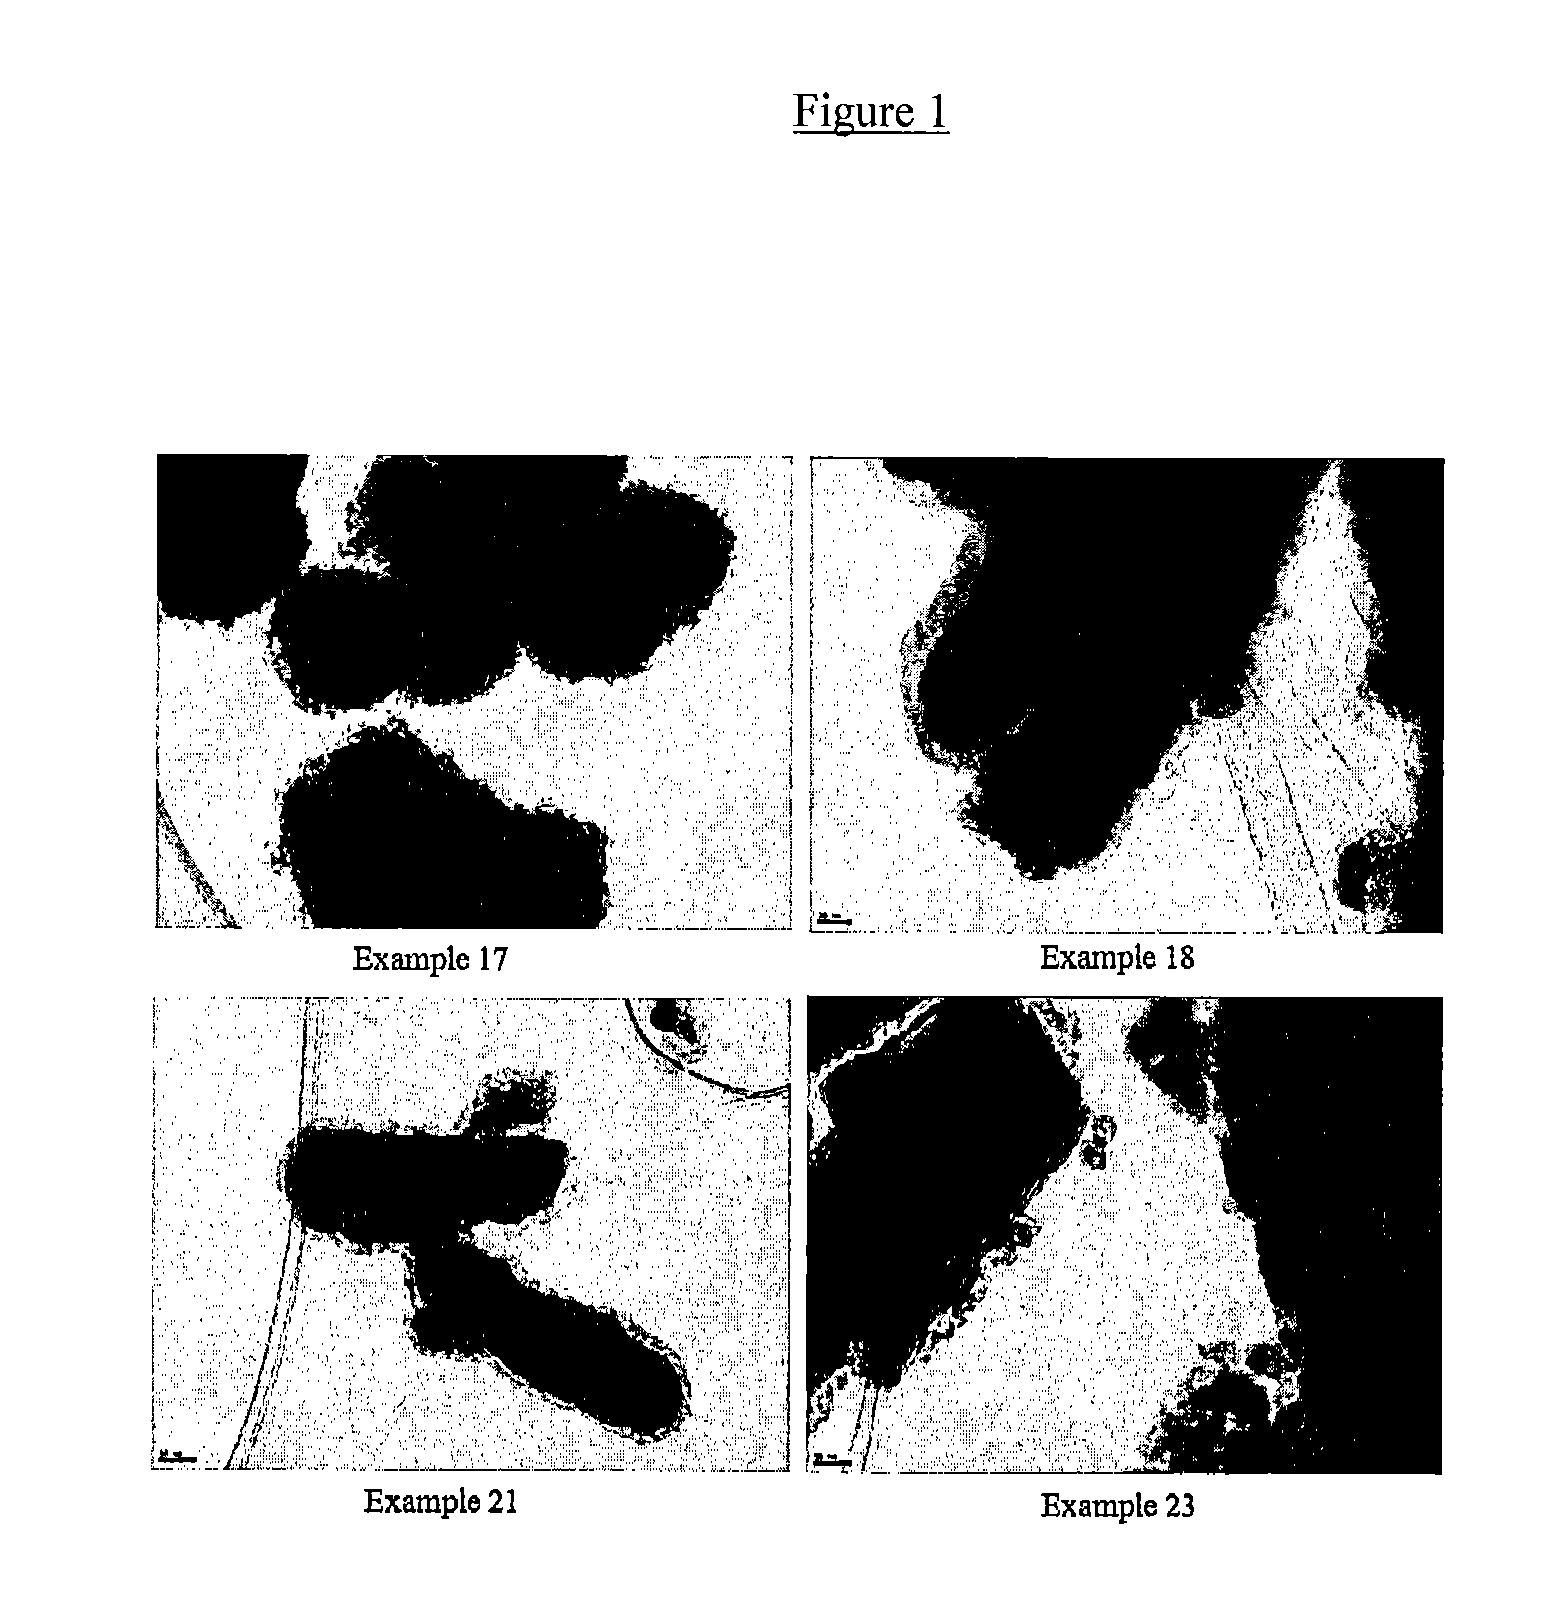 Core-shell composite inorganic metal oxides and method of preparing for prevention of thermal oxidative degradation in polymer and resin compositions